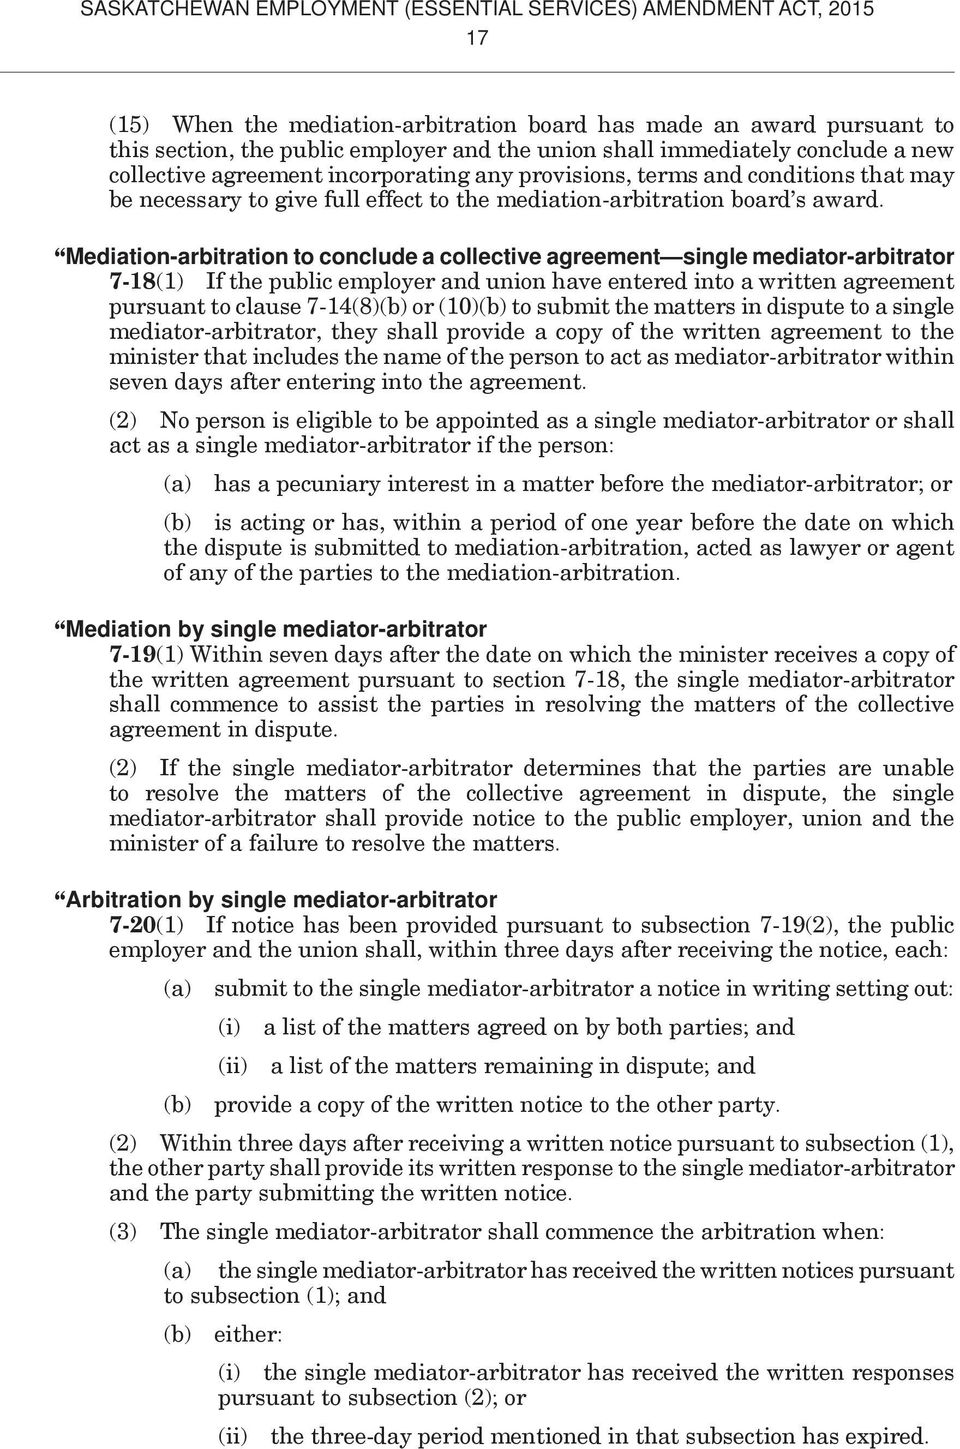 Mediation-arbitration to conclude a collective agreement single mediator-arbitrator 7-18(1) If the public employer and union have entered into a written agreement pursuant to clause 7-14(8)(b) or